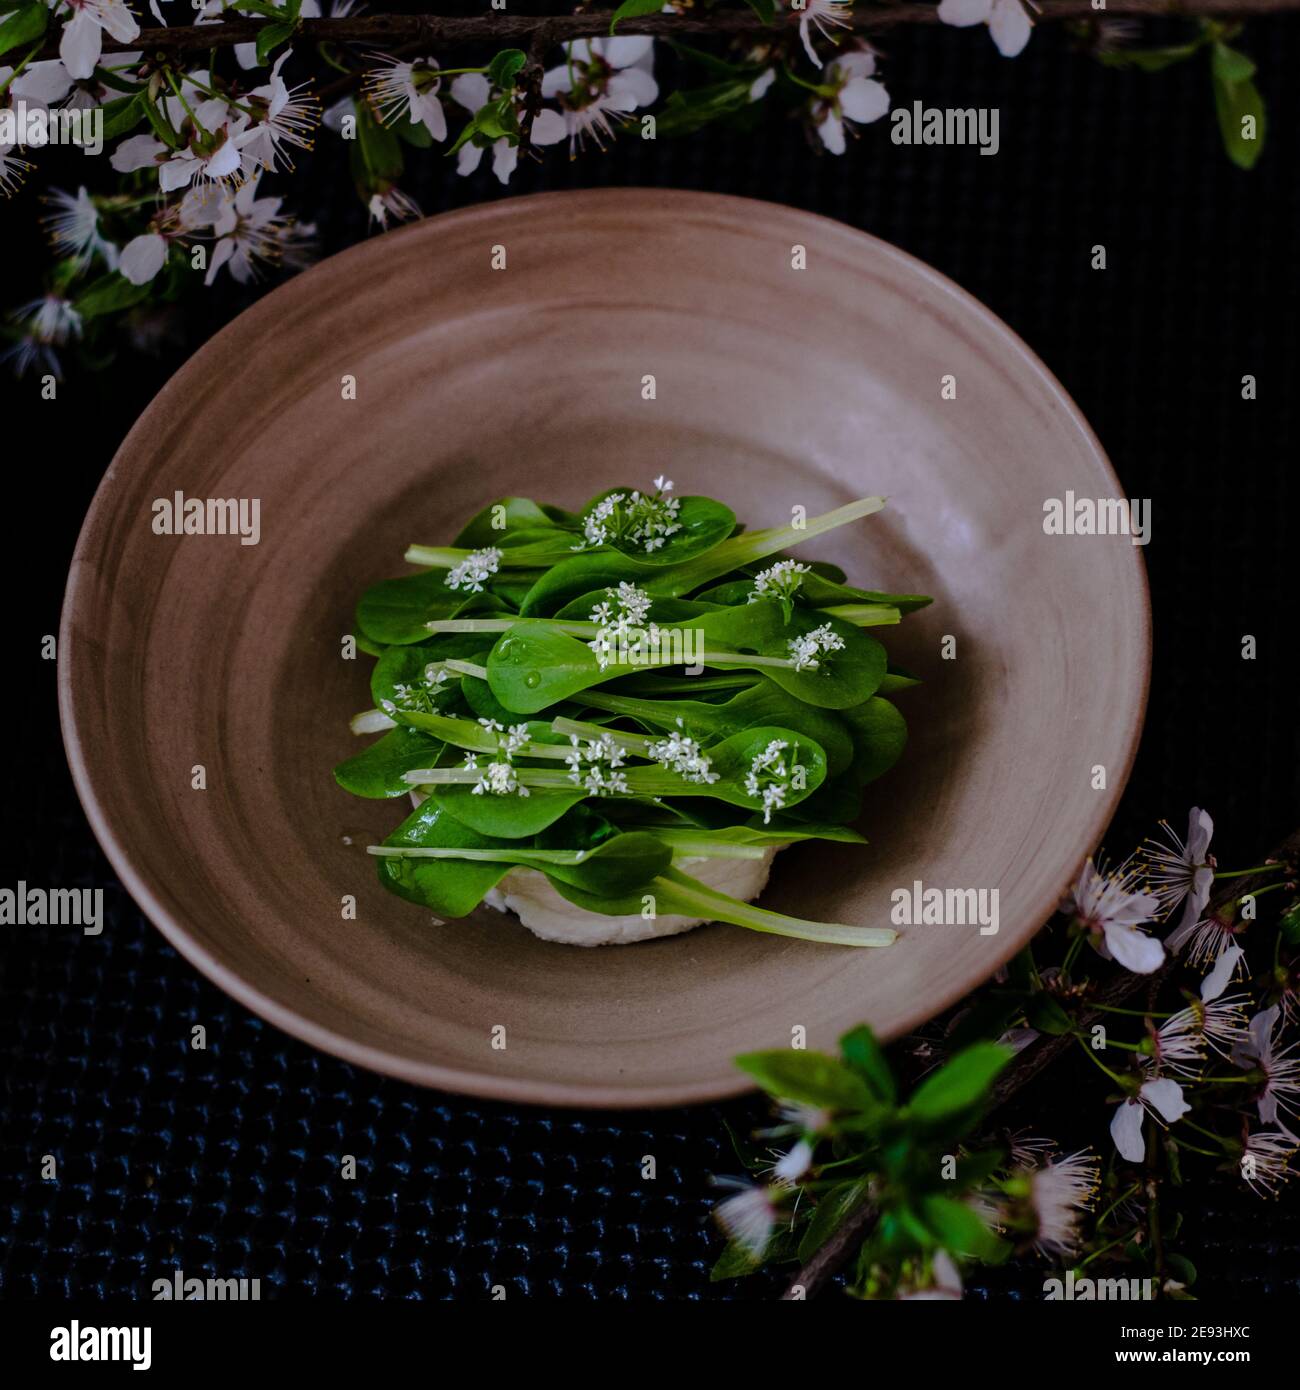 Dish of cottage cheese and garden greens with flowers made at a restaurant Stock Photo